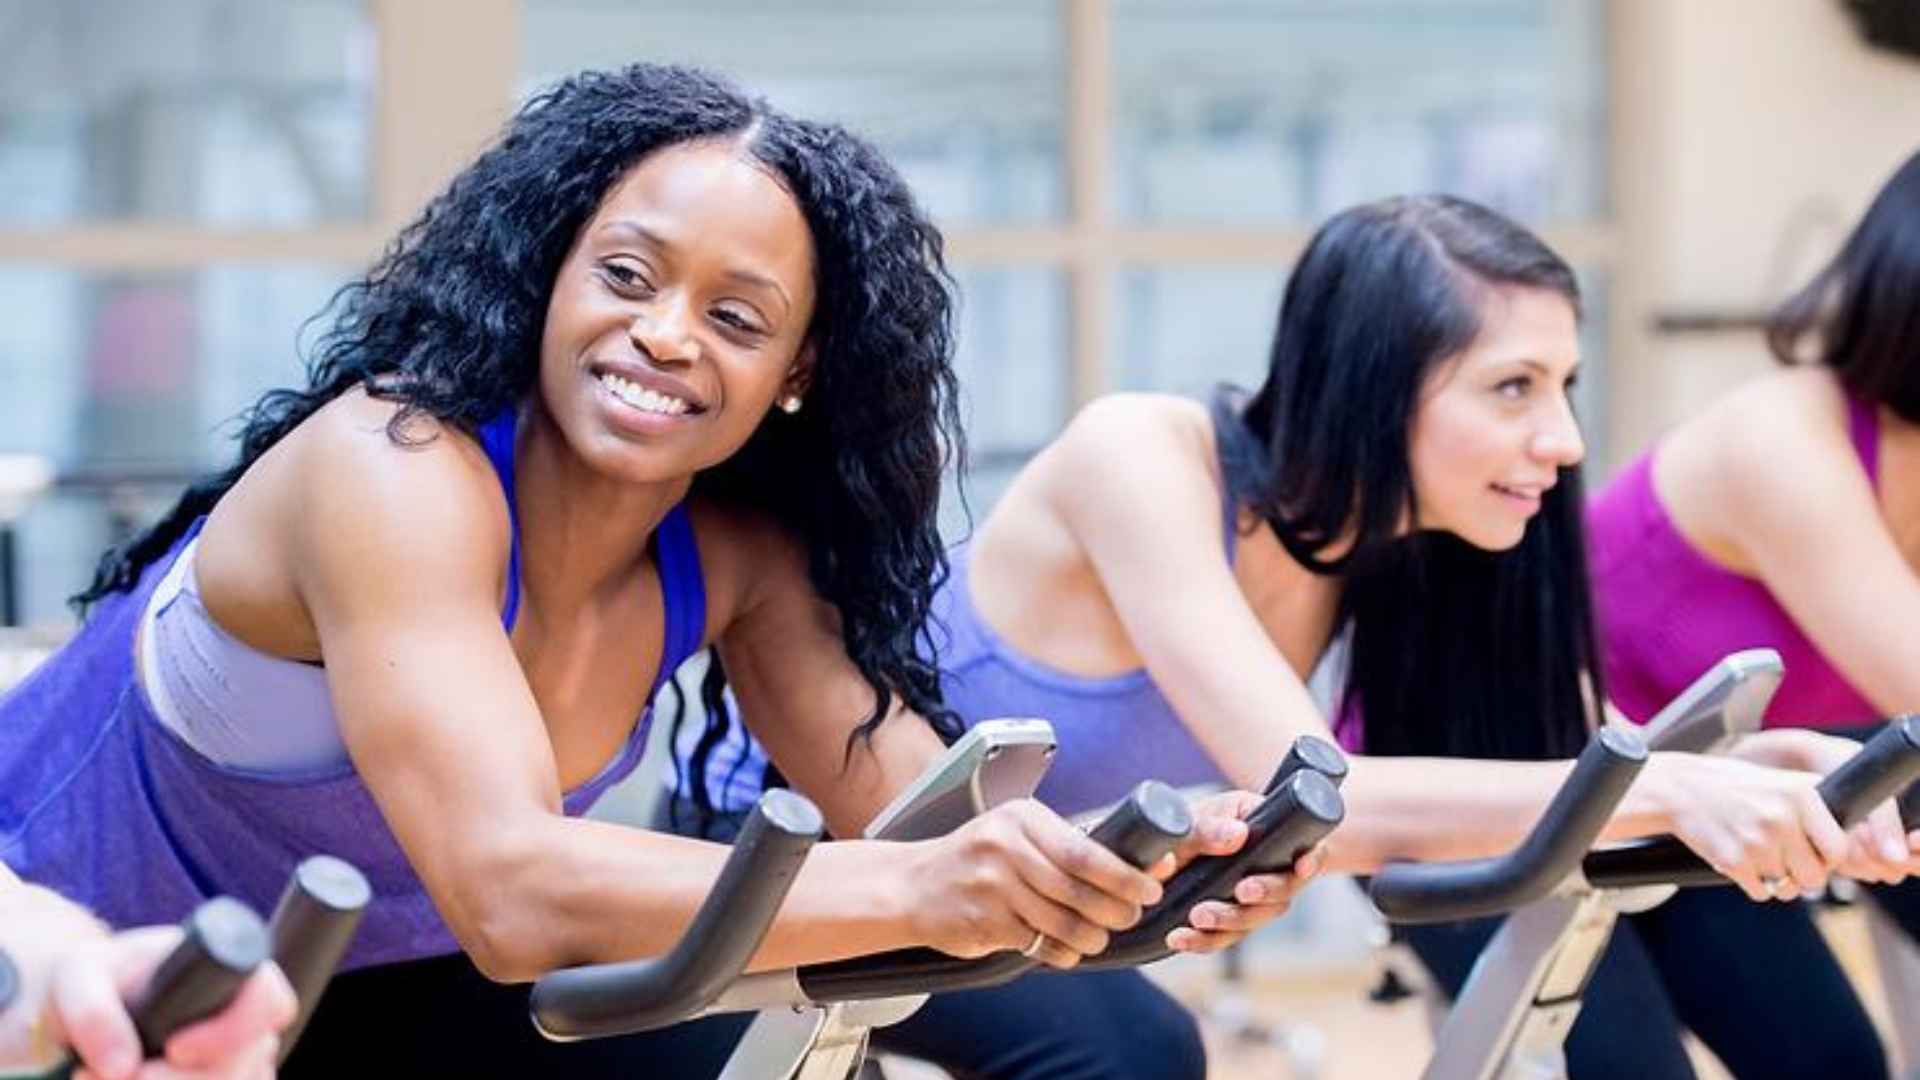 Women on exercise bikes in a gym